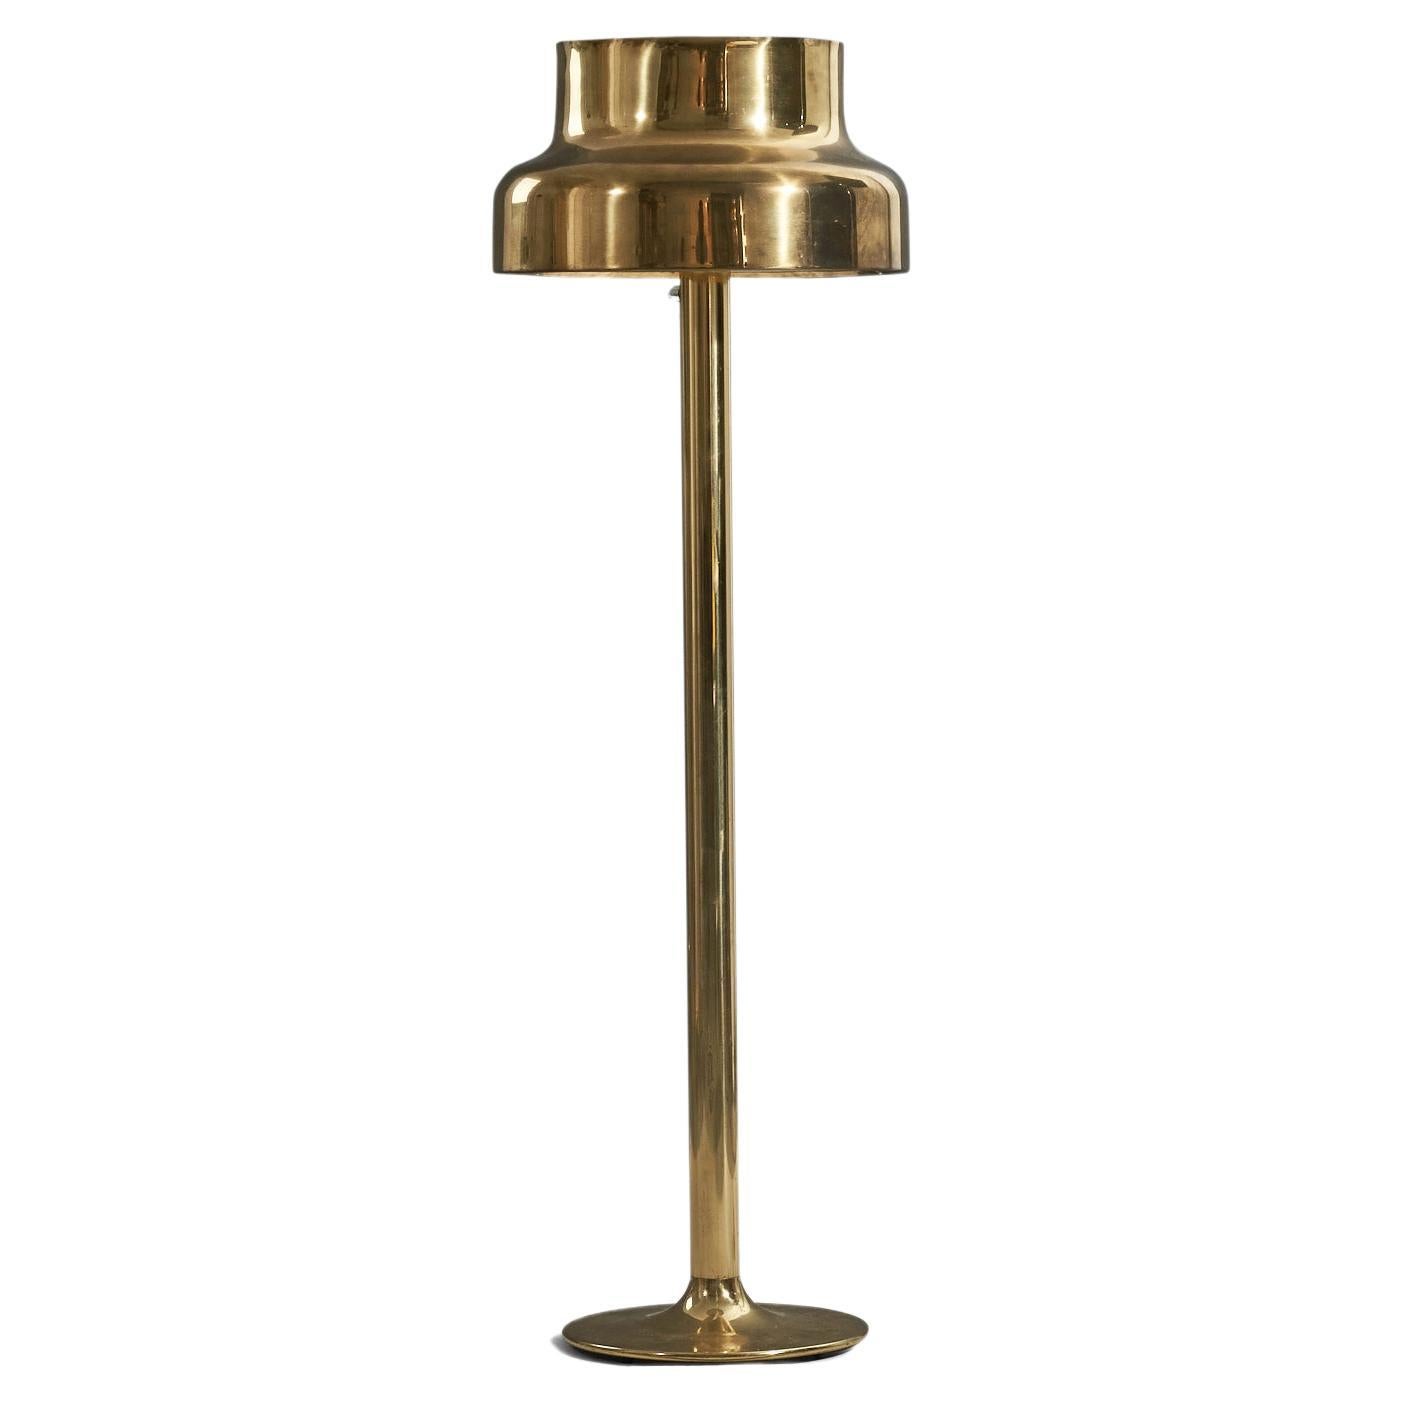 Anders Pehrson, Early "Bumling" Floor Lamp, Brass, Ateljé Lyktan, Sweden, 1960s For Sale